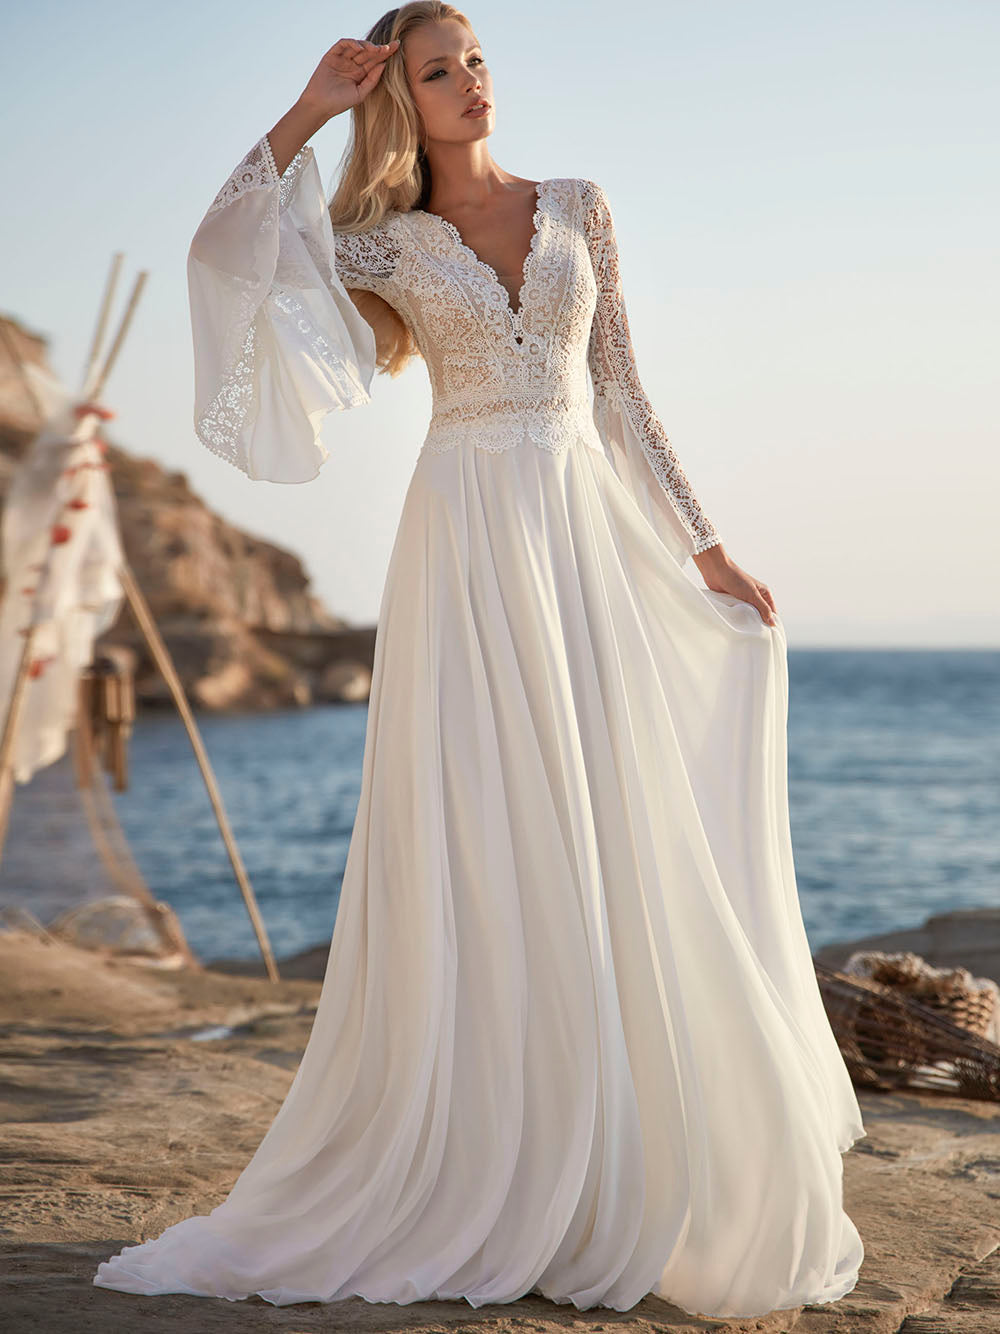 Long Bat Sleeves A-Line V-Neck Backless Elopement Bridal Gown Beach Wedding Dresses BlissGown Champagne Lining 2 